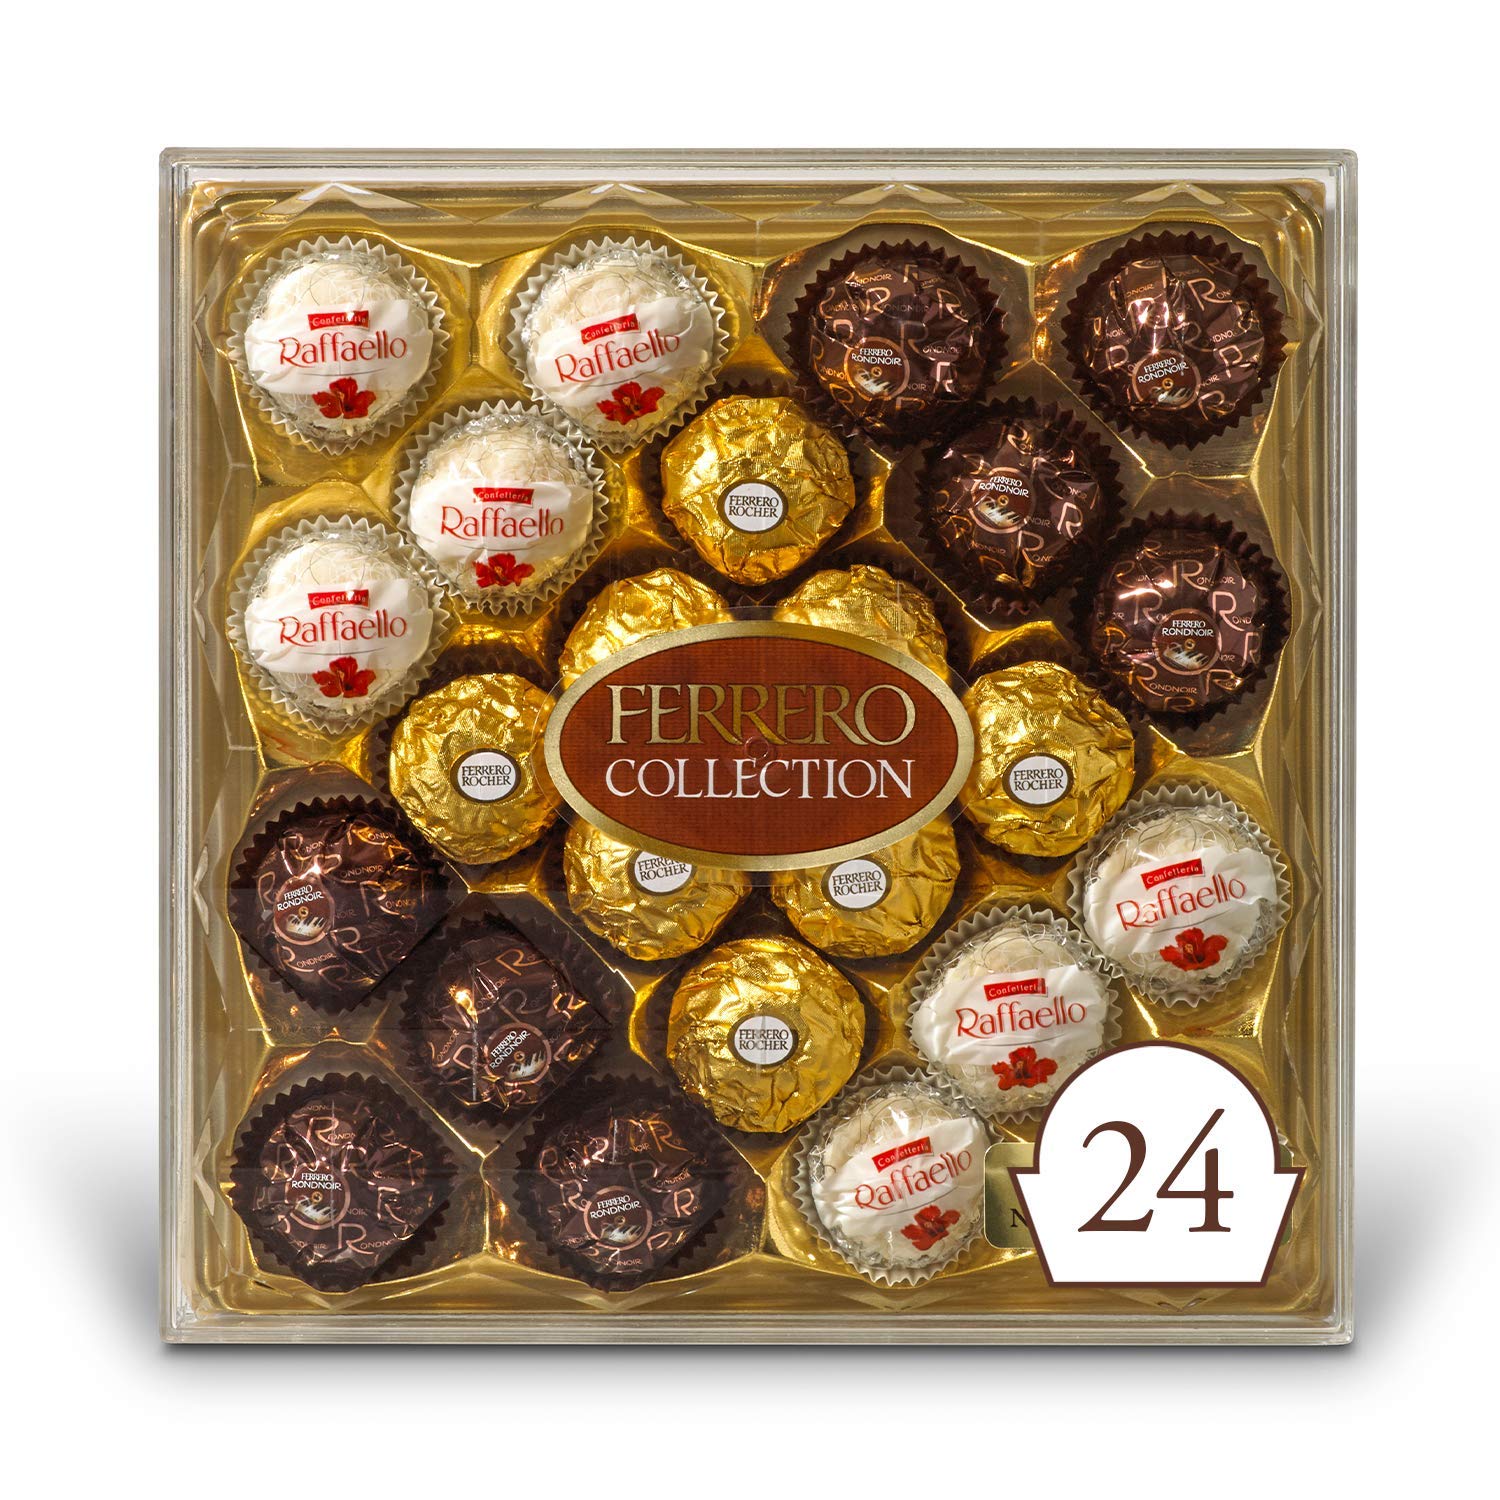 Ferrero Rocher 24 Count Gift Box, Assorted Coconut Candy and Chocolates, $8.92 amazon